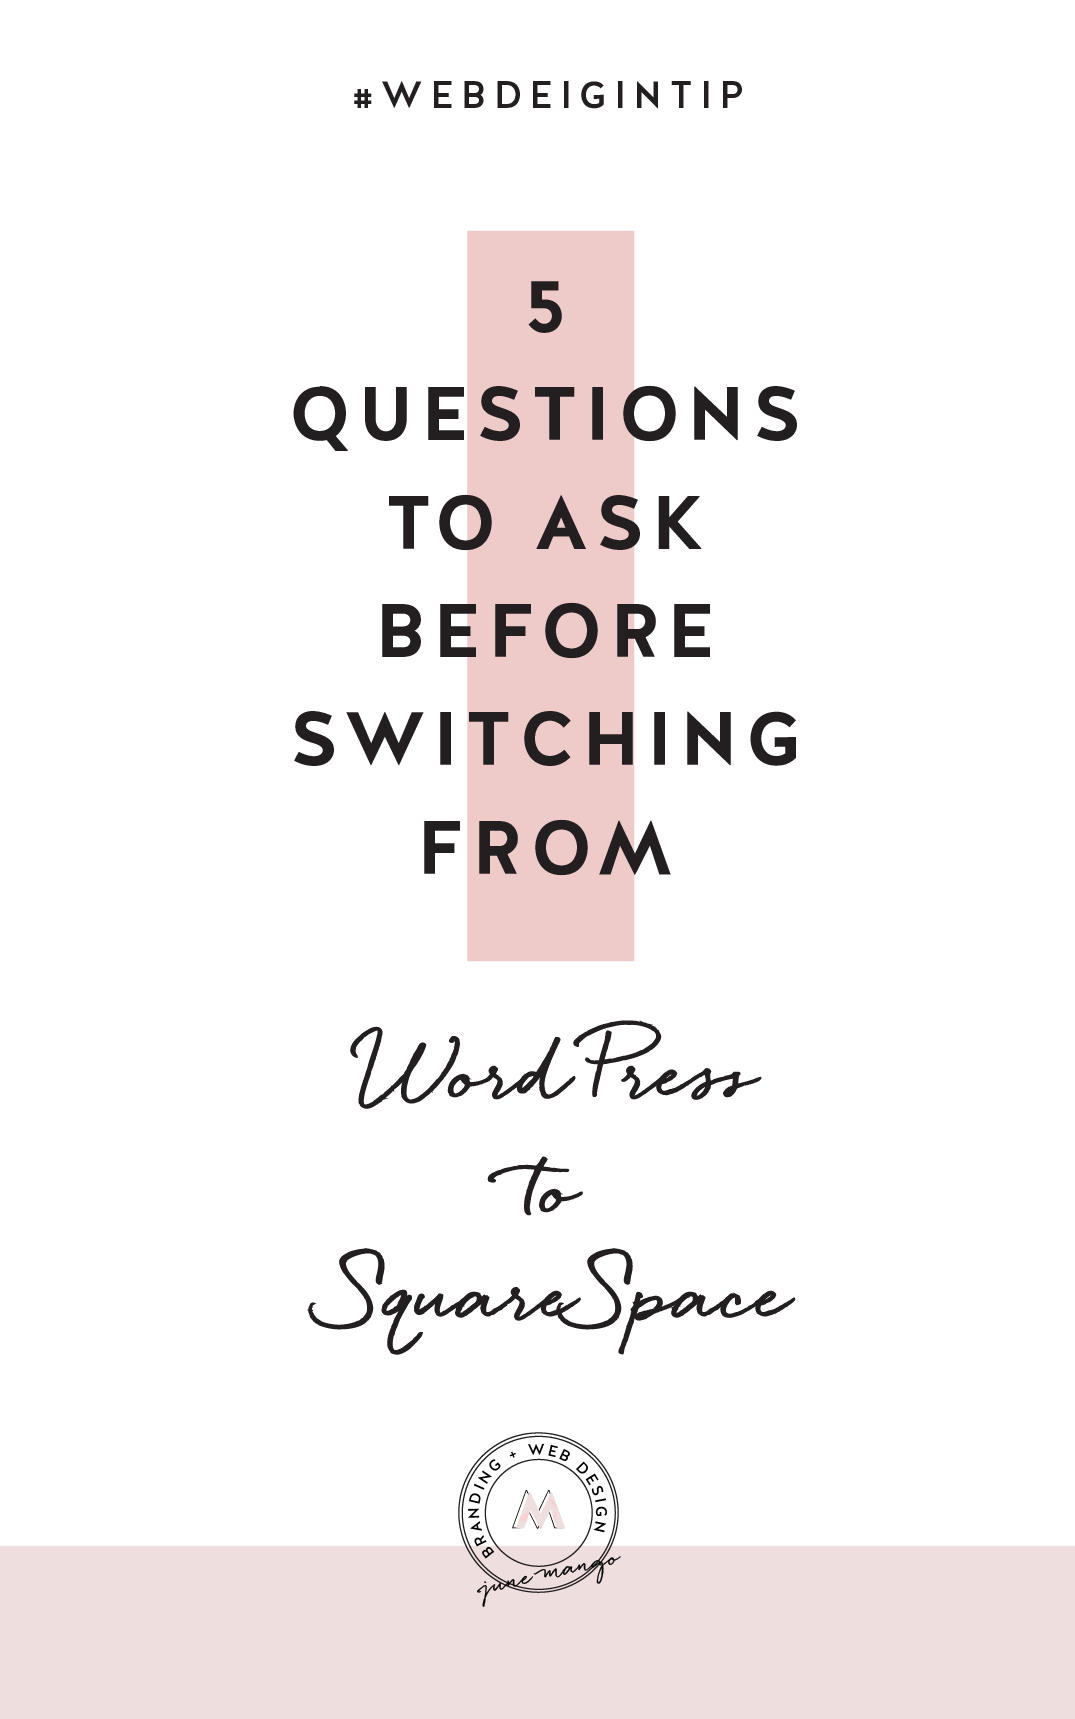 5-questions-to-ask-before-switching-wordpress-to-squarespace-04.png